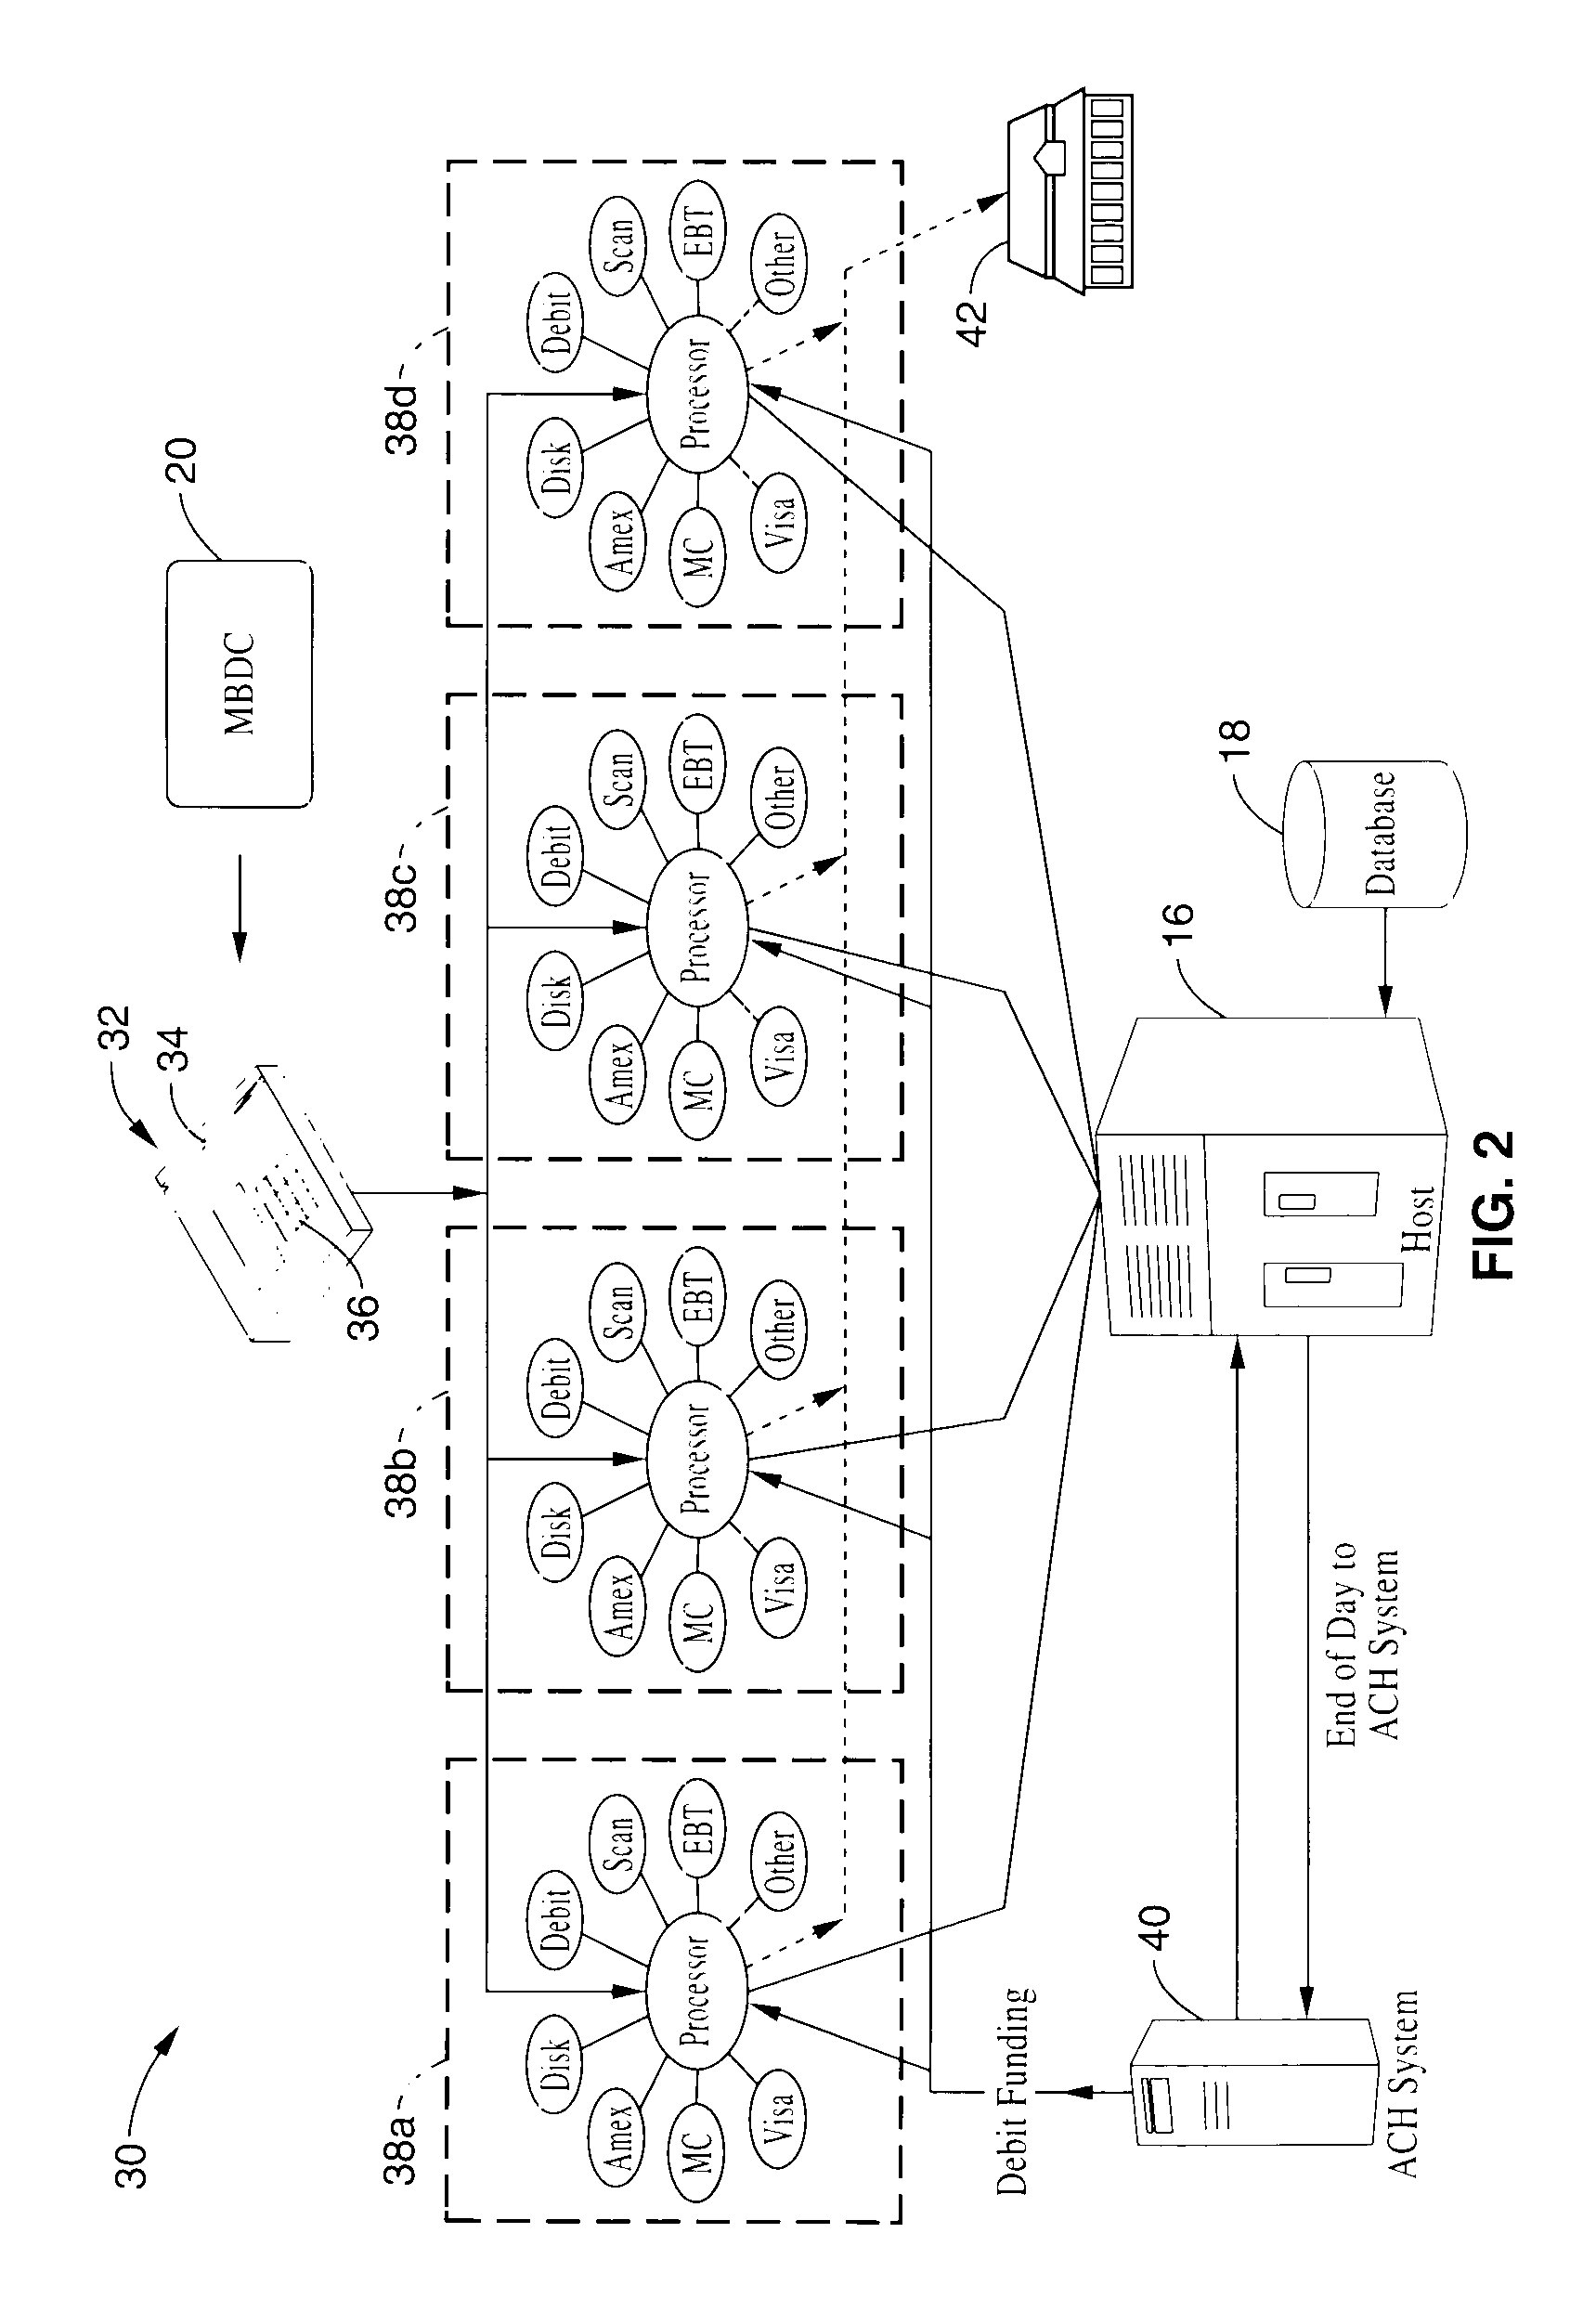 Method and system for facilitating electronic funds transactions